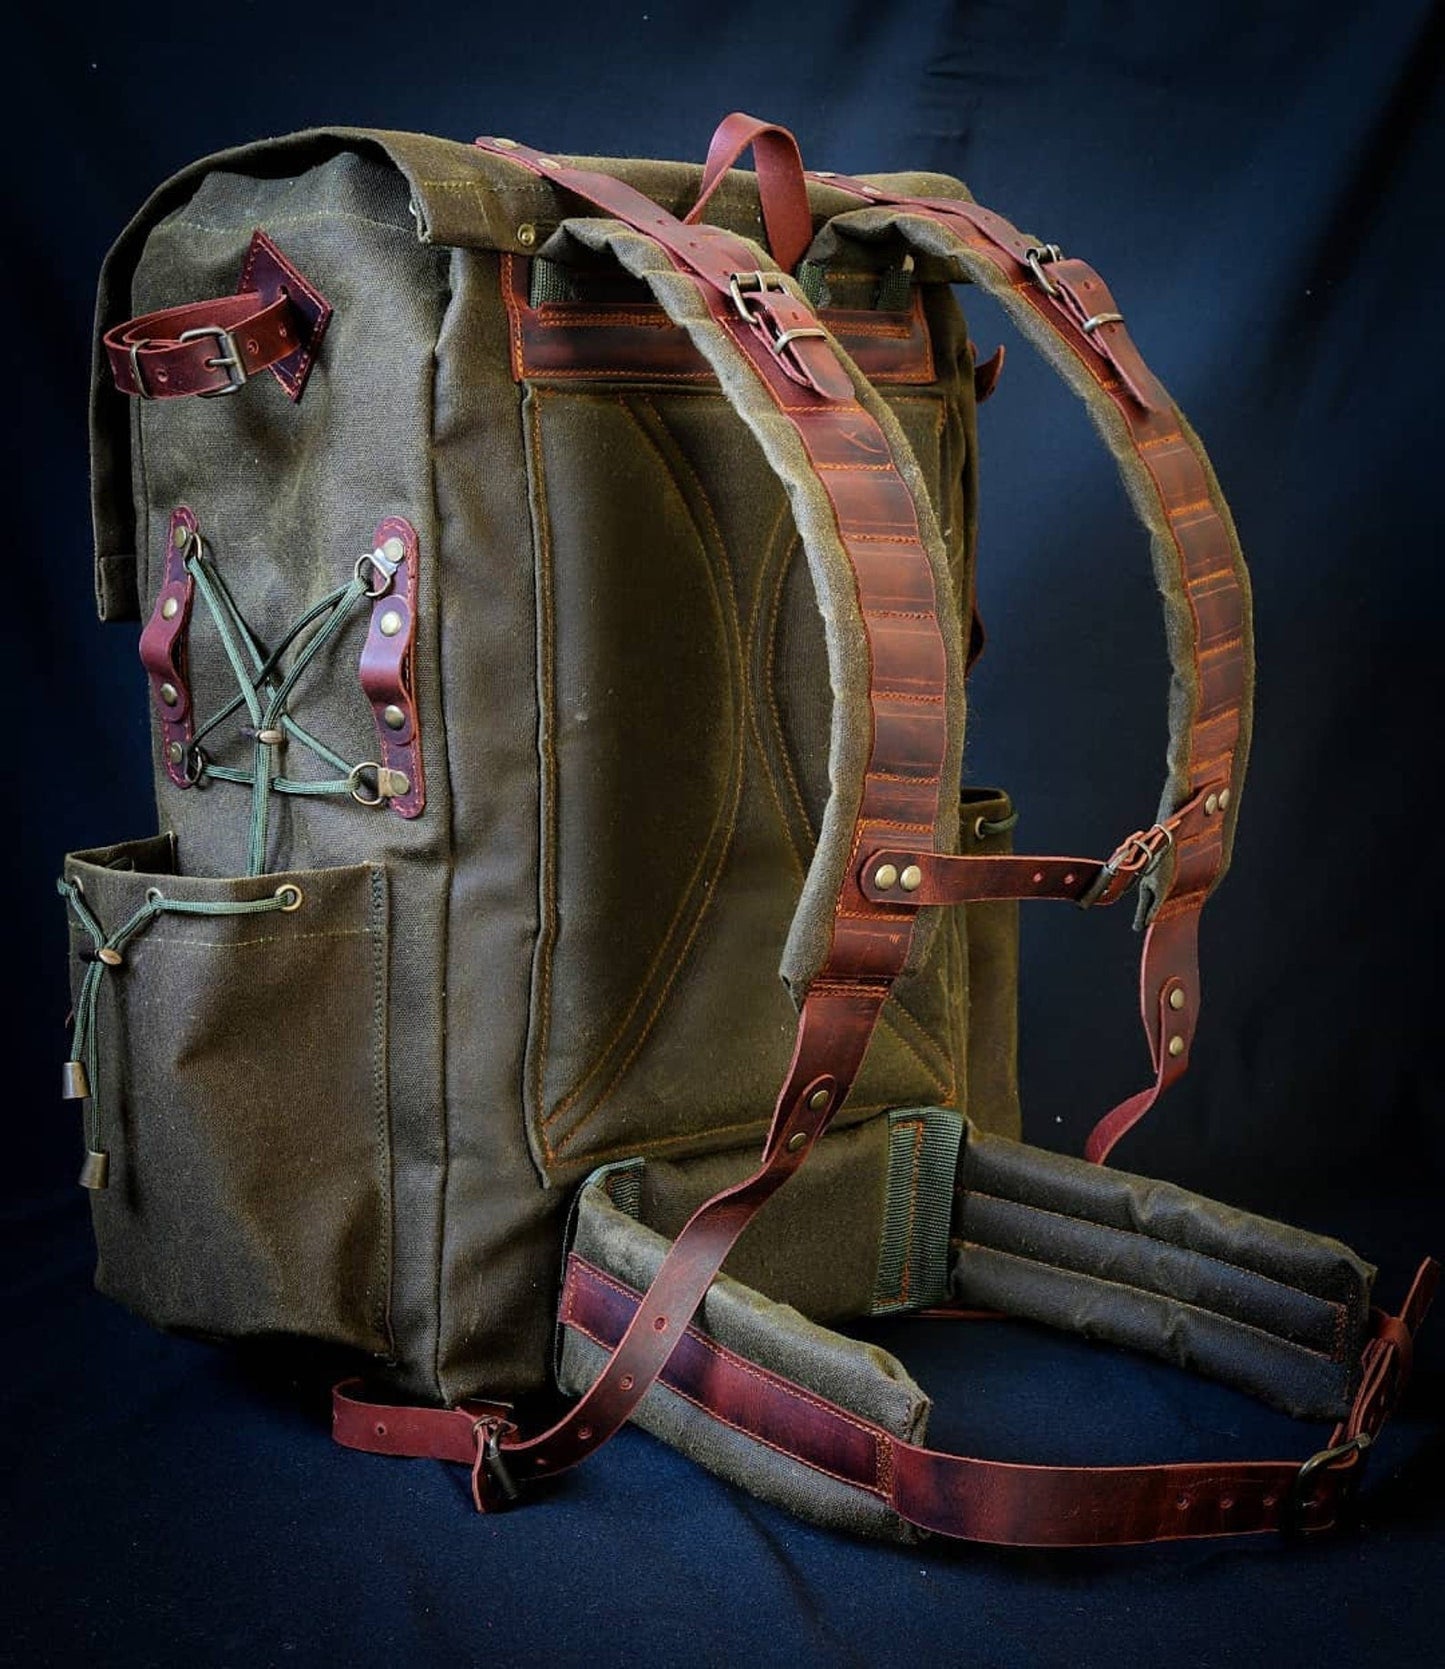 Only 12 Pieces With 3 Colour, Handmade Leather and Waxed Canvas Backpack for Travel, Camping | 50 Liter | Personalization  for your request bushcraft - camping - hiking backpack 99percenthandmade   